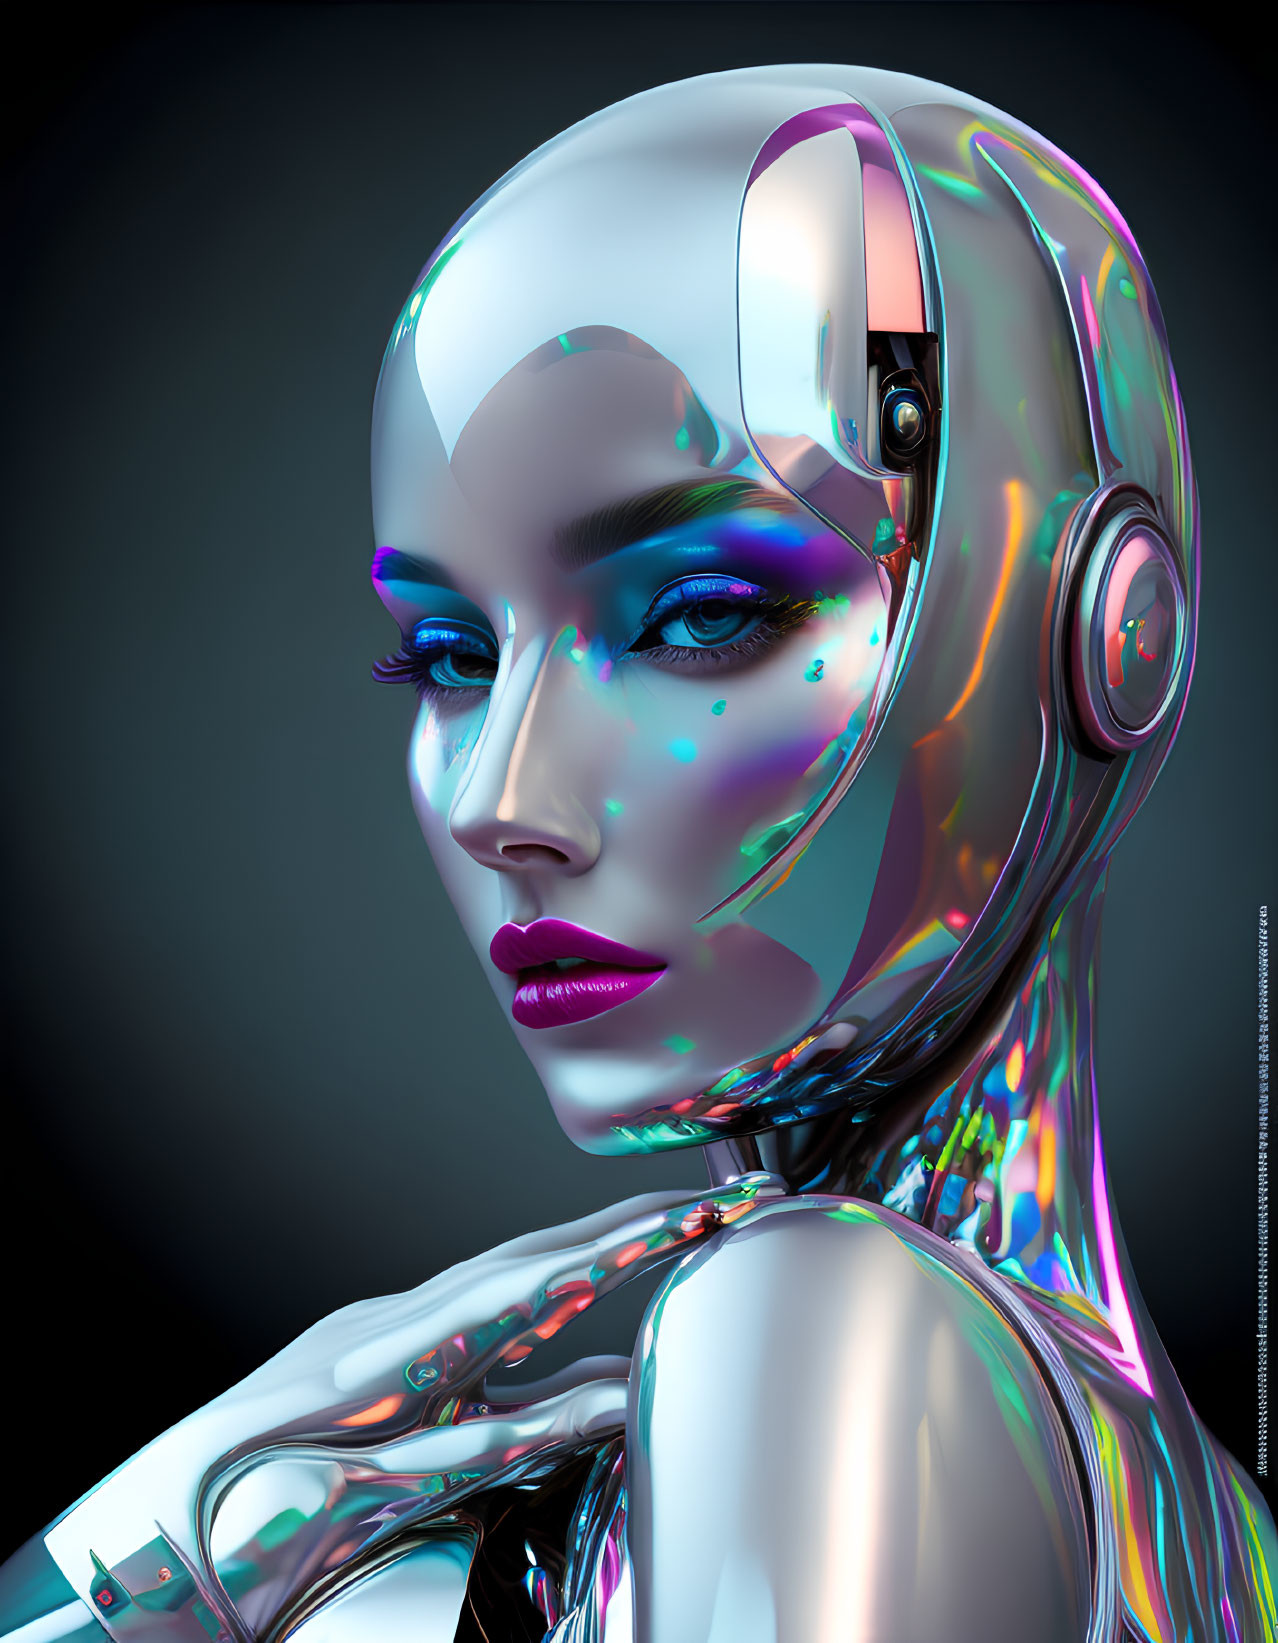 Futuristic female android with metallic skin and headphones on dark background